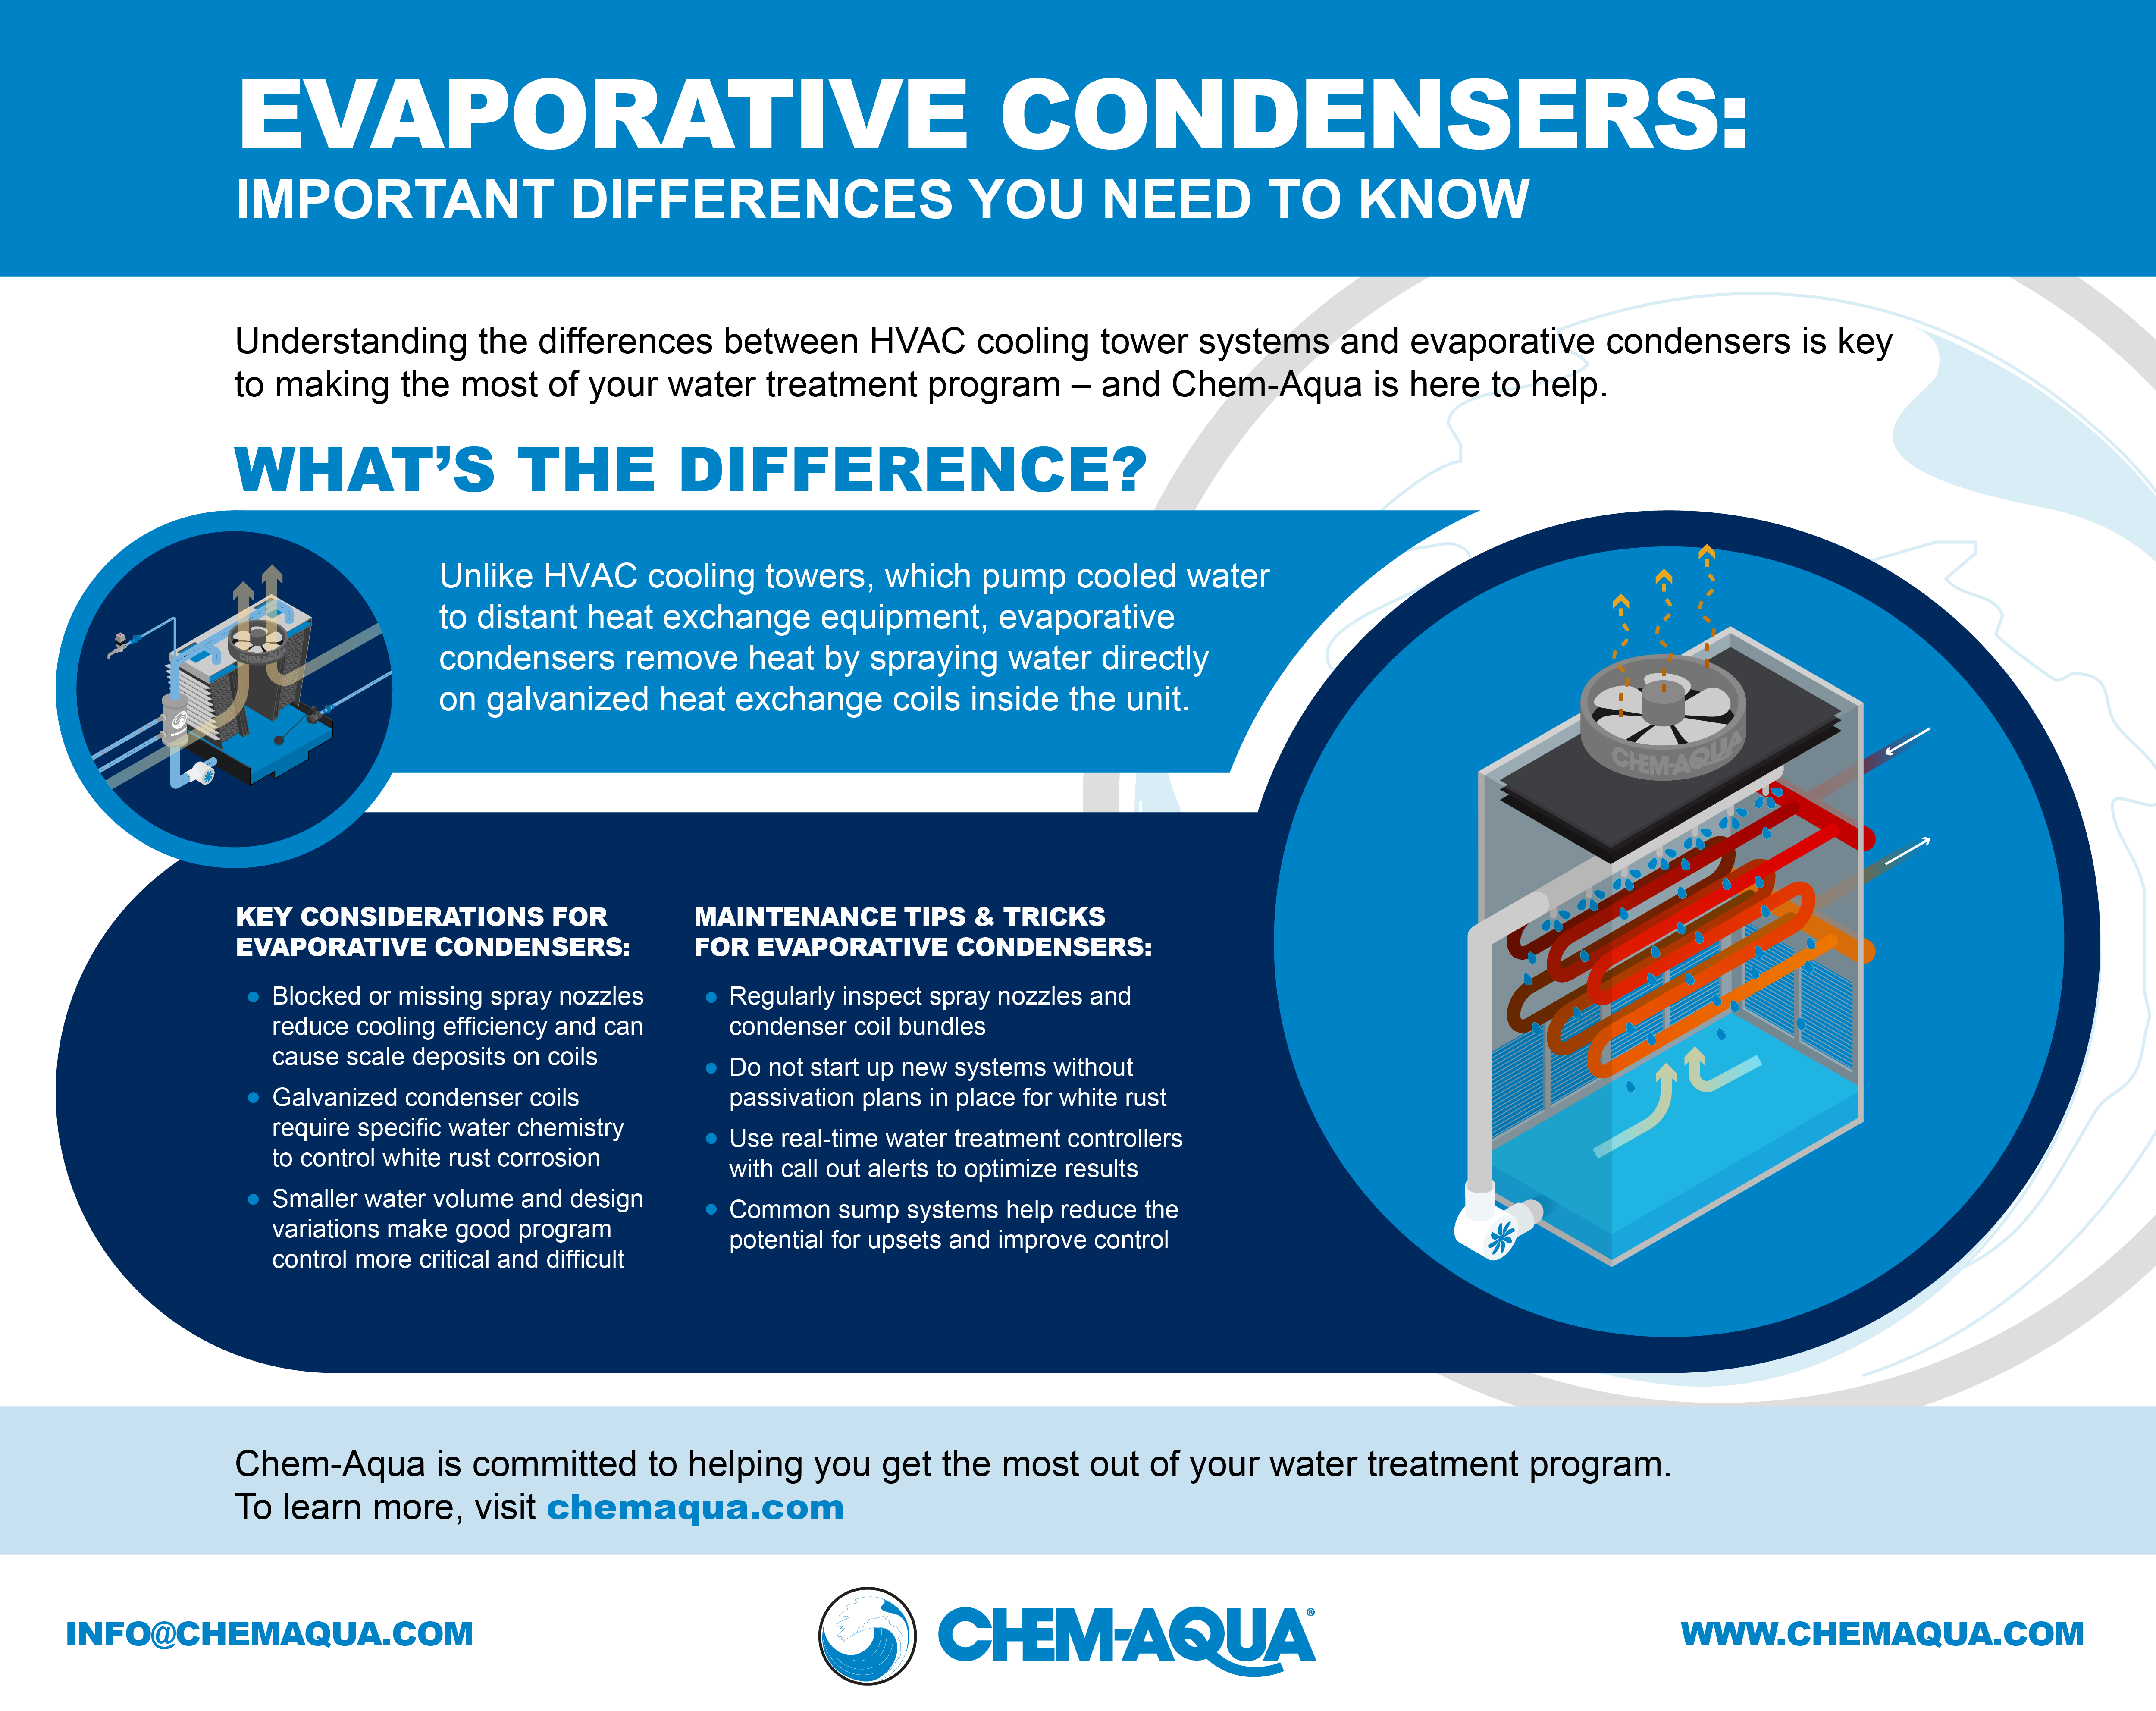 Evaporative Condensers: The Important Differences You Need to Know